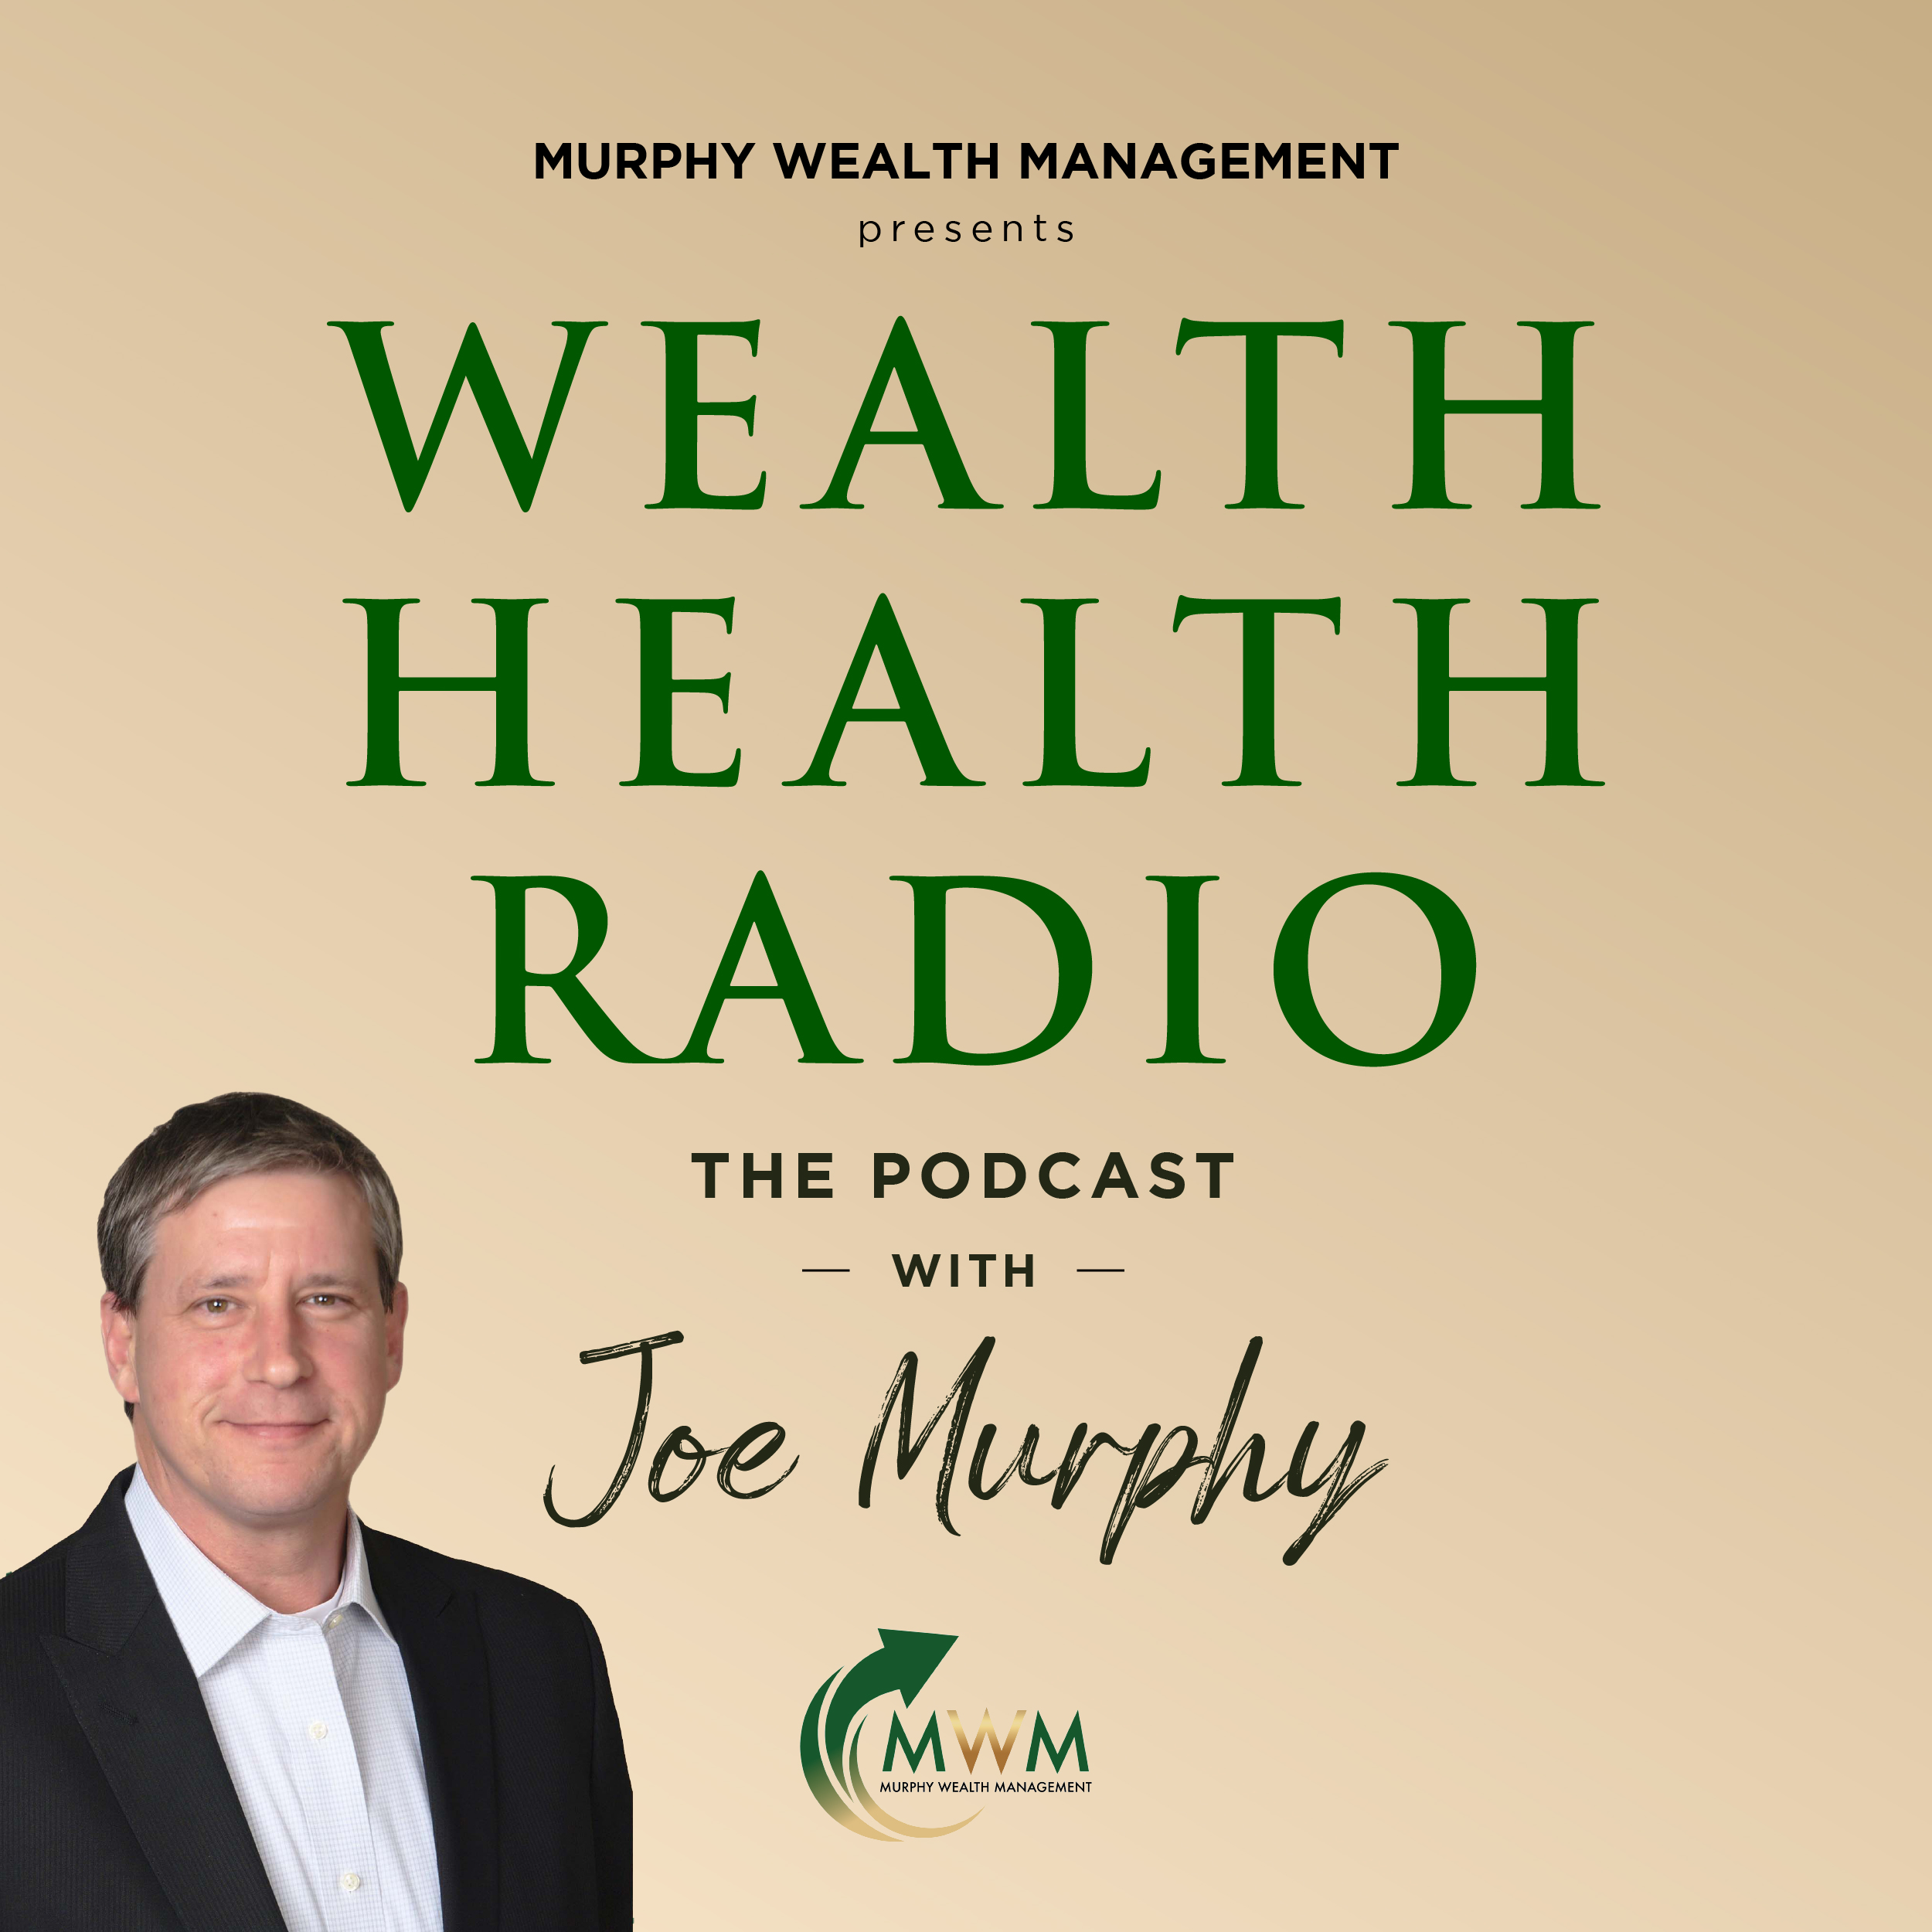 Wealth Health Radio Unsolicited advice comes pouring in when you get ready to retire, Joe Murphy offers some suggestions on what you can do rather than listening to bad advice.